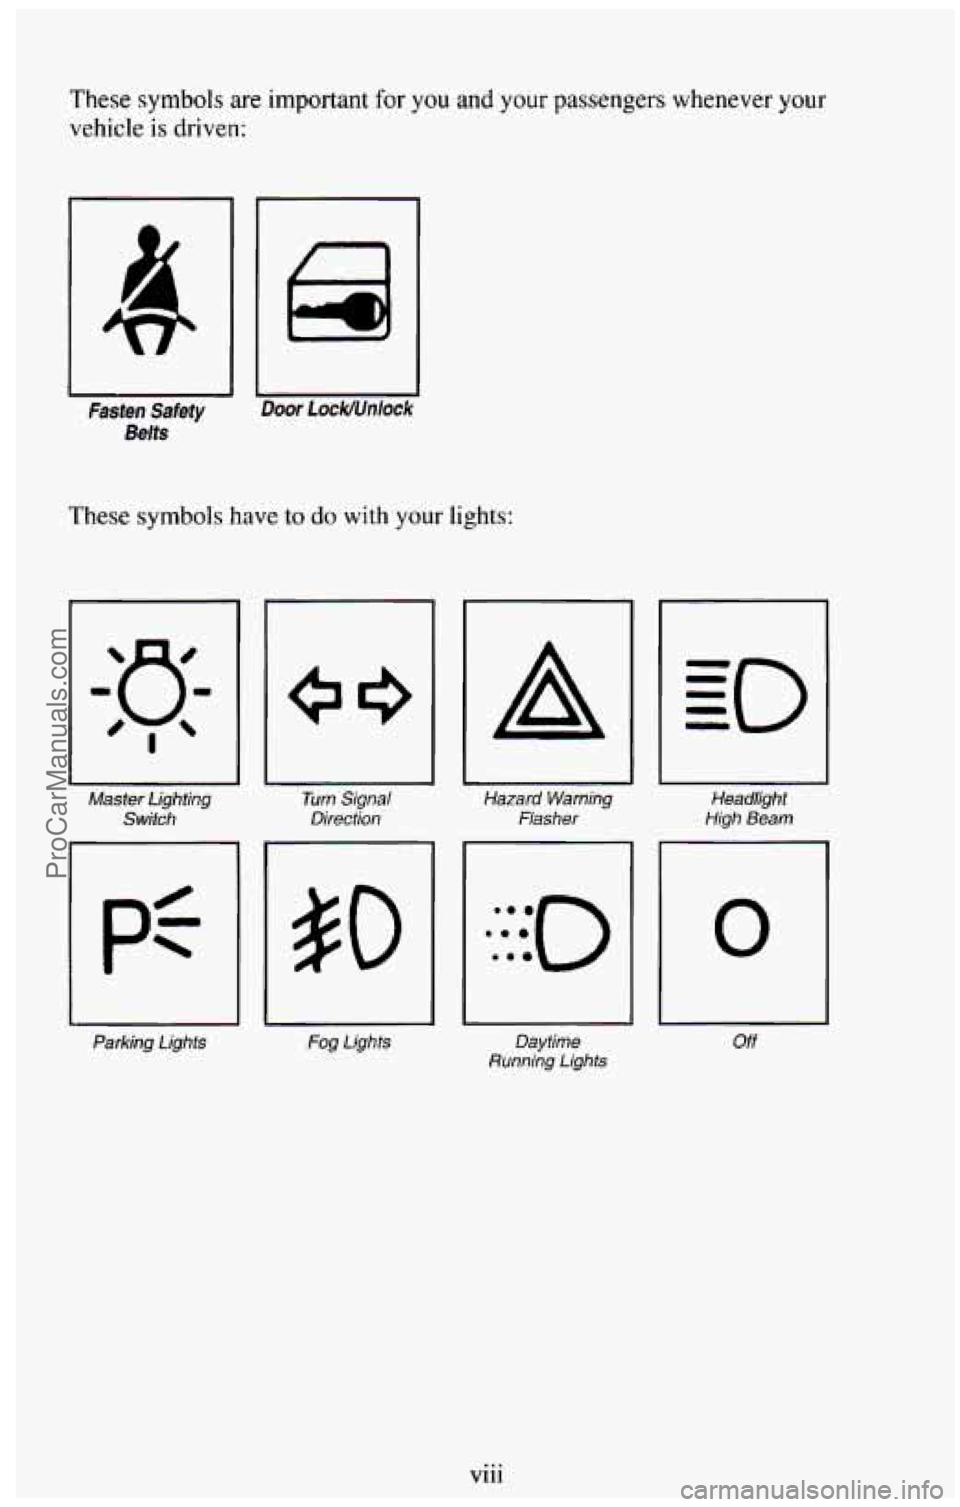 CHEVROLET SUBURBAN 1994  Owners Manual These symbols are important for you and your passengers whenever your 
vehicle is driven: 
IC I 
Fasten Safety Door 1 ock/Unlock 
Belts 
These symbols have to do with your lights: 
Master  Lighting 
S